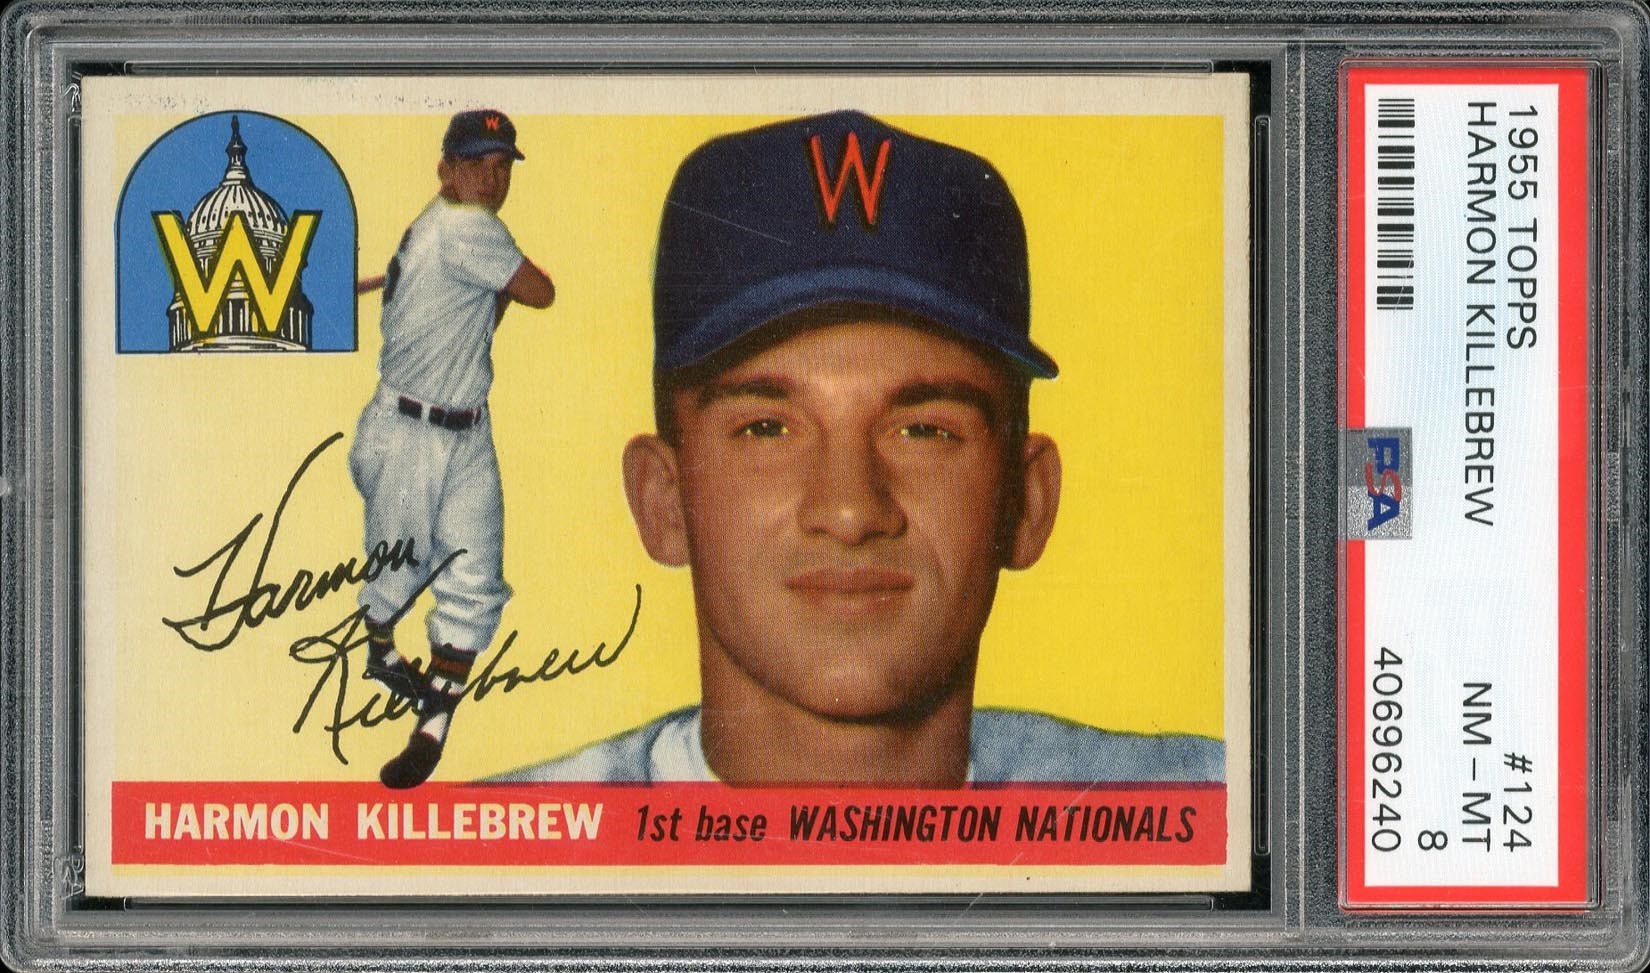 Baseball and Trading Cards - 1955 Topps #124 Harmon Killebrew Rookie Card - PSA NM-MT 8